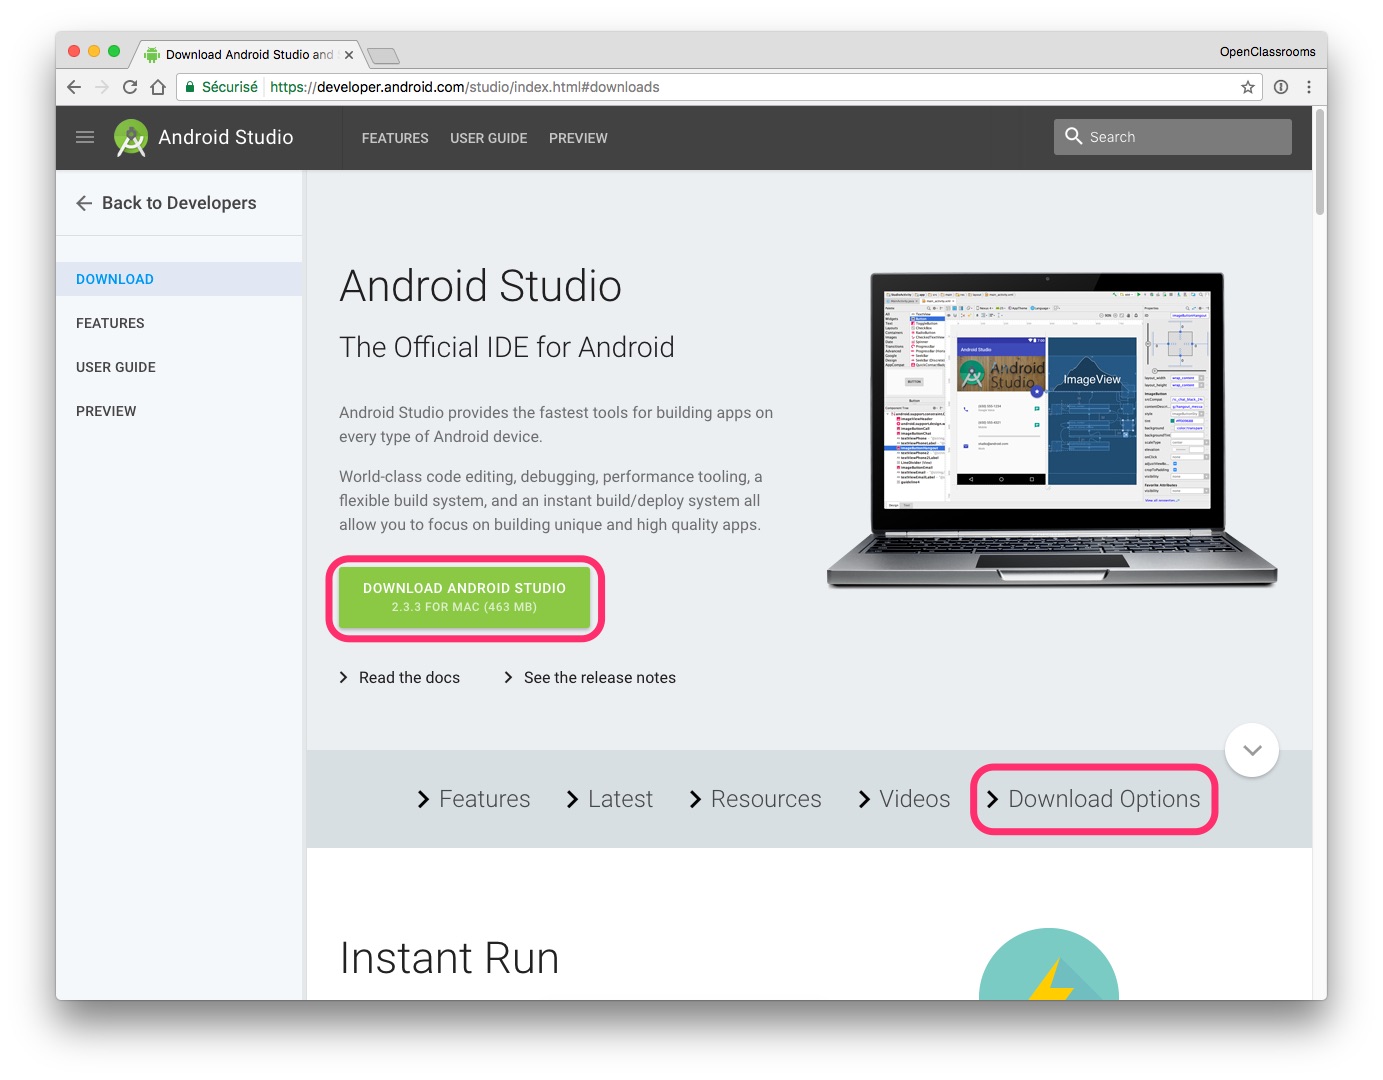 A screenshot of the Android Studio Download page